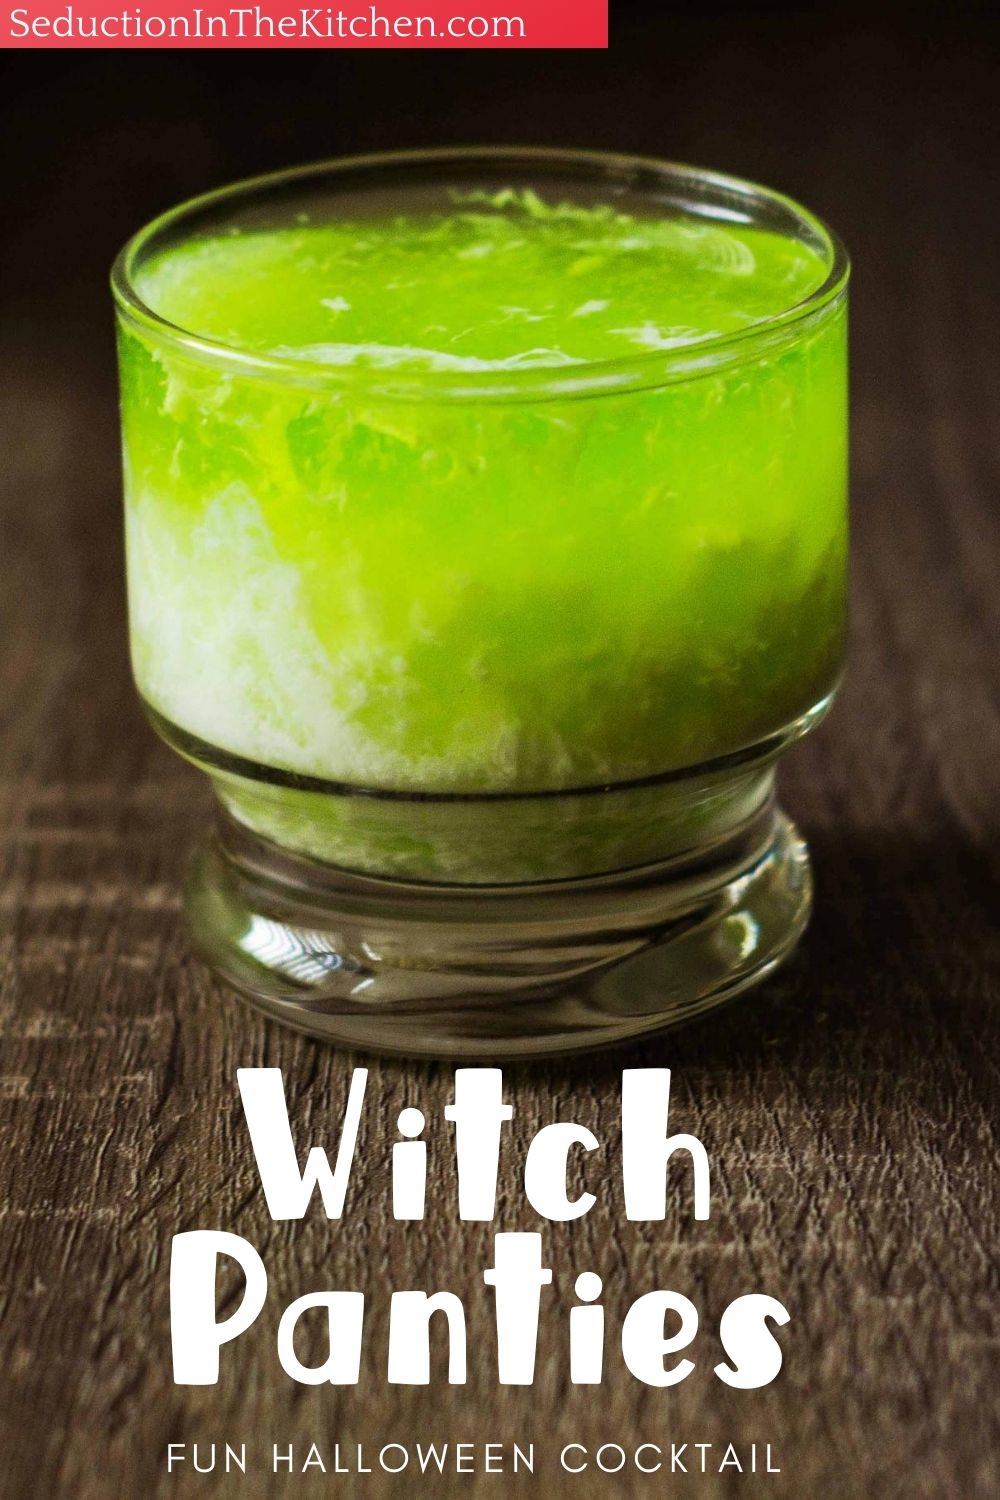 Witch Panties {A Simple Spooky Cocktail}